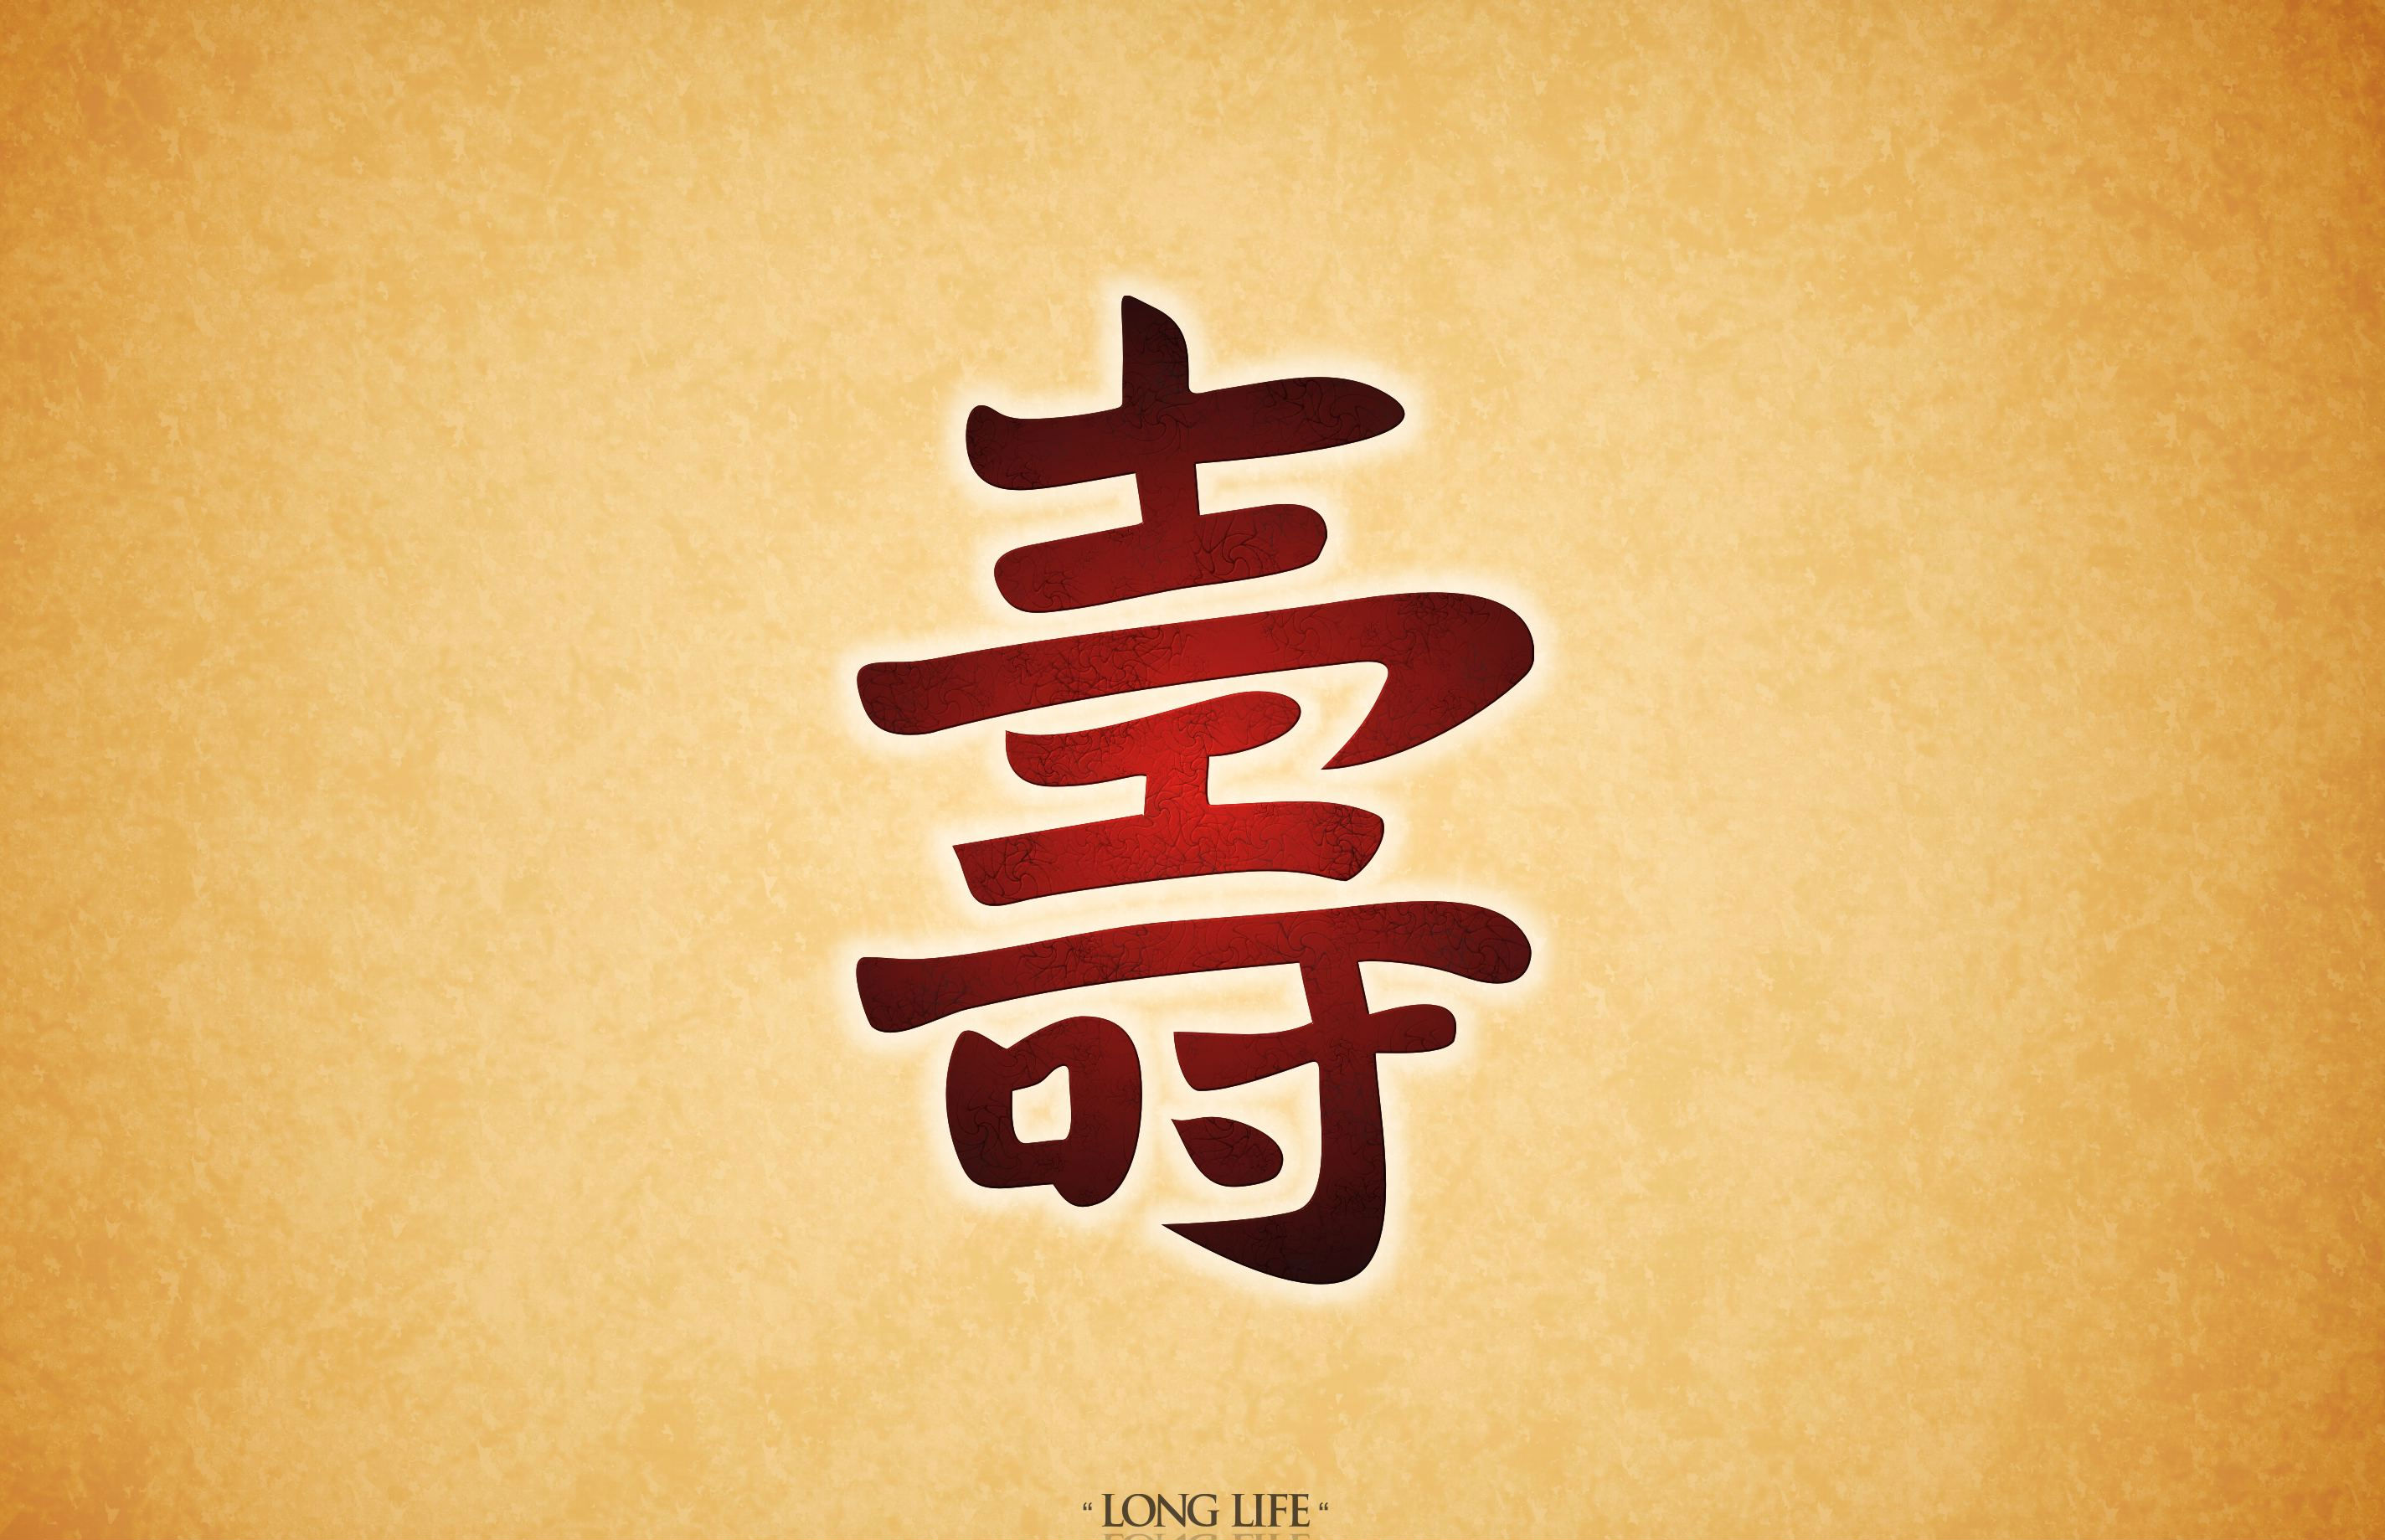 long life in chinese Wallpaper Background 13307